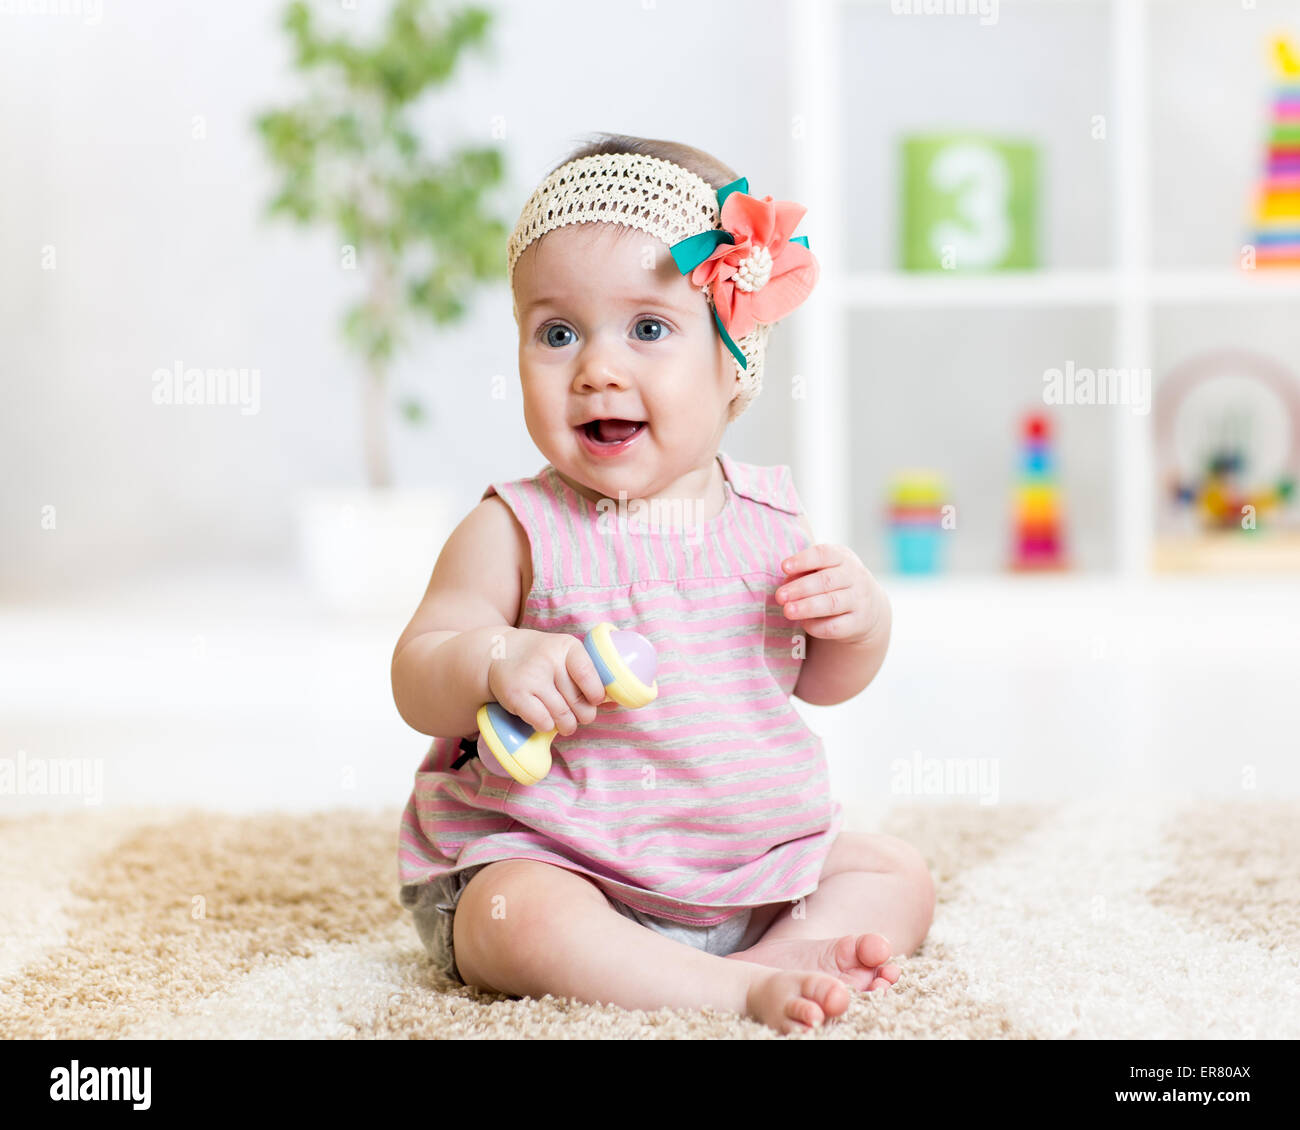 Cute baby Stock Photos, Royalty Free Cute baby Images